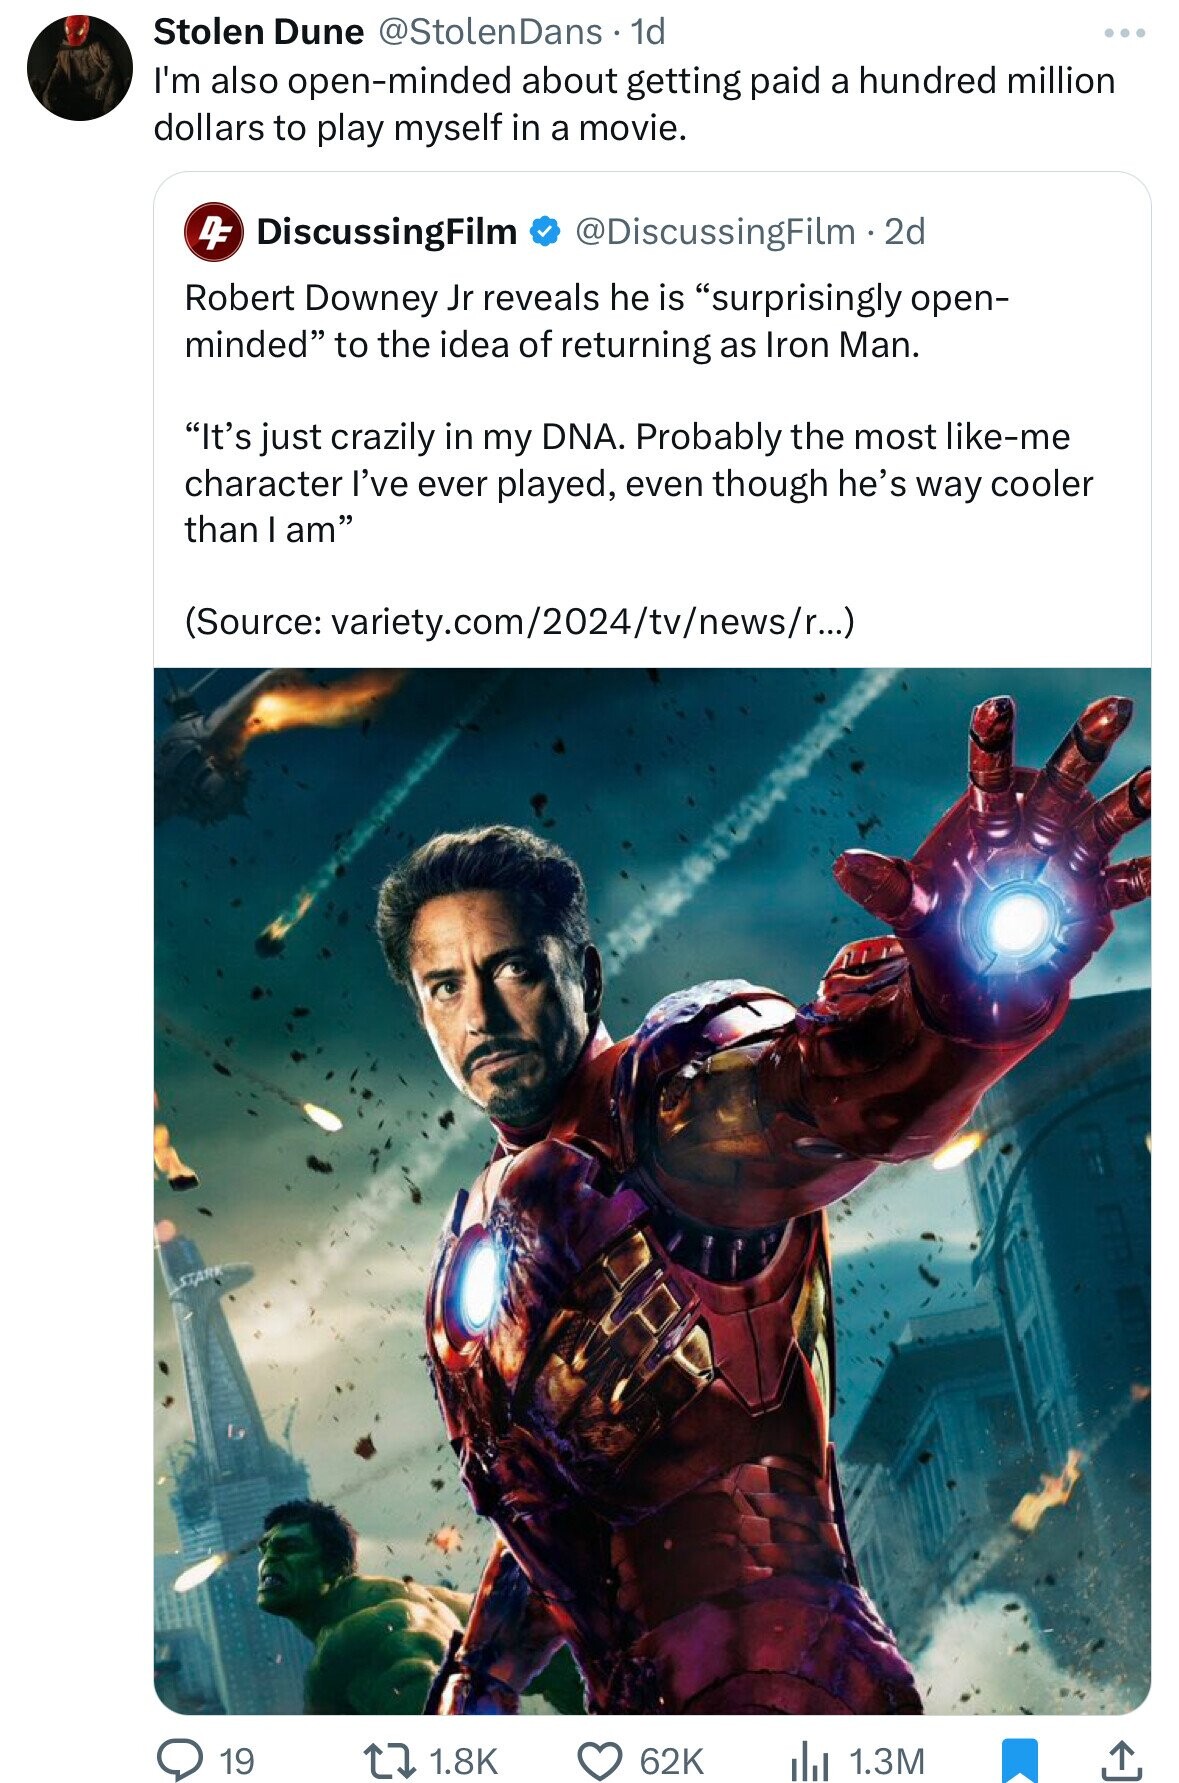 best avengers - Stark Stolen Dune Dans. 1d I'm also openminded about getting paid a hundred million dollars to play myself in a movie. 4 DiscussingFilm . 2d Robert Downey Jr reveals he is "surprisingly open minded" to the idea of returning as Iron Man. "I